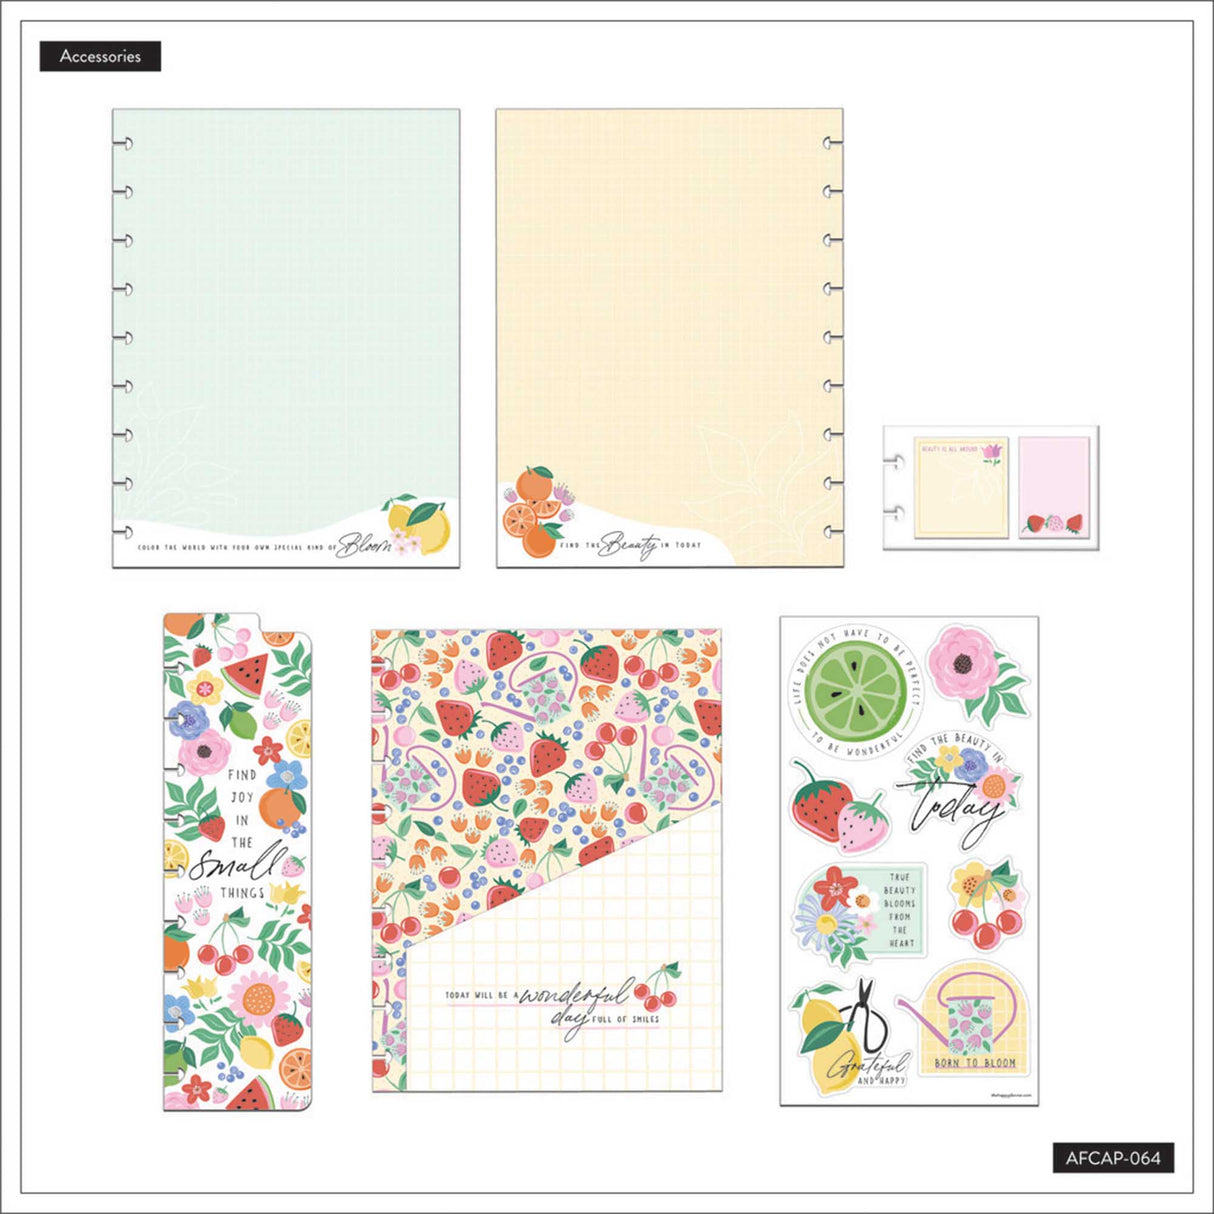 Happy Planner Heart & Home CLASSIC Accessory Pack